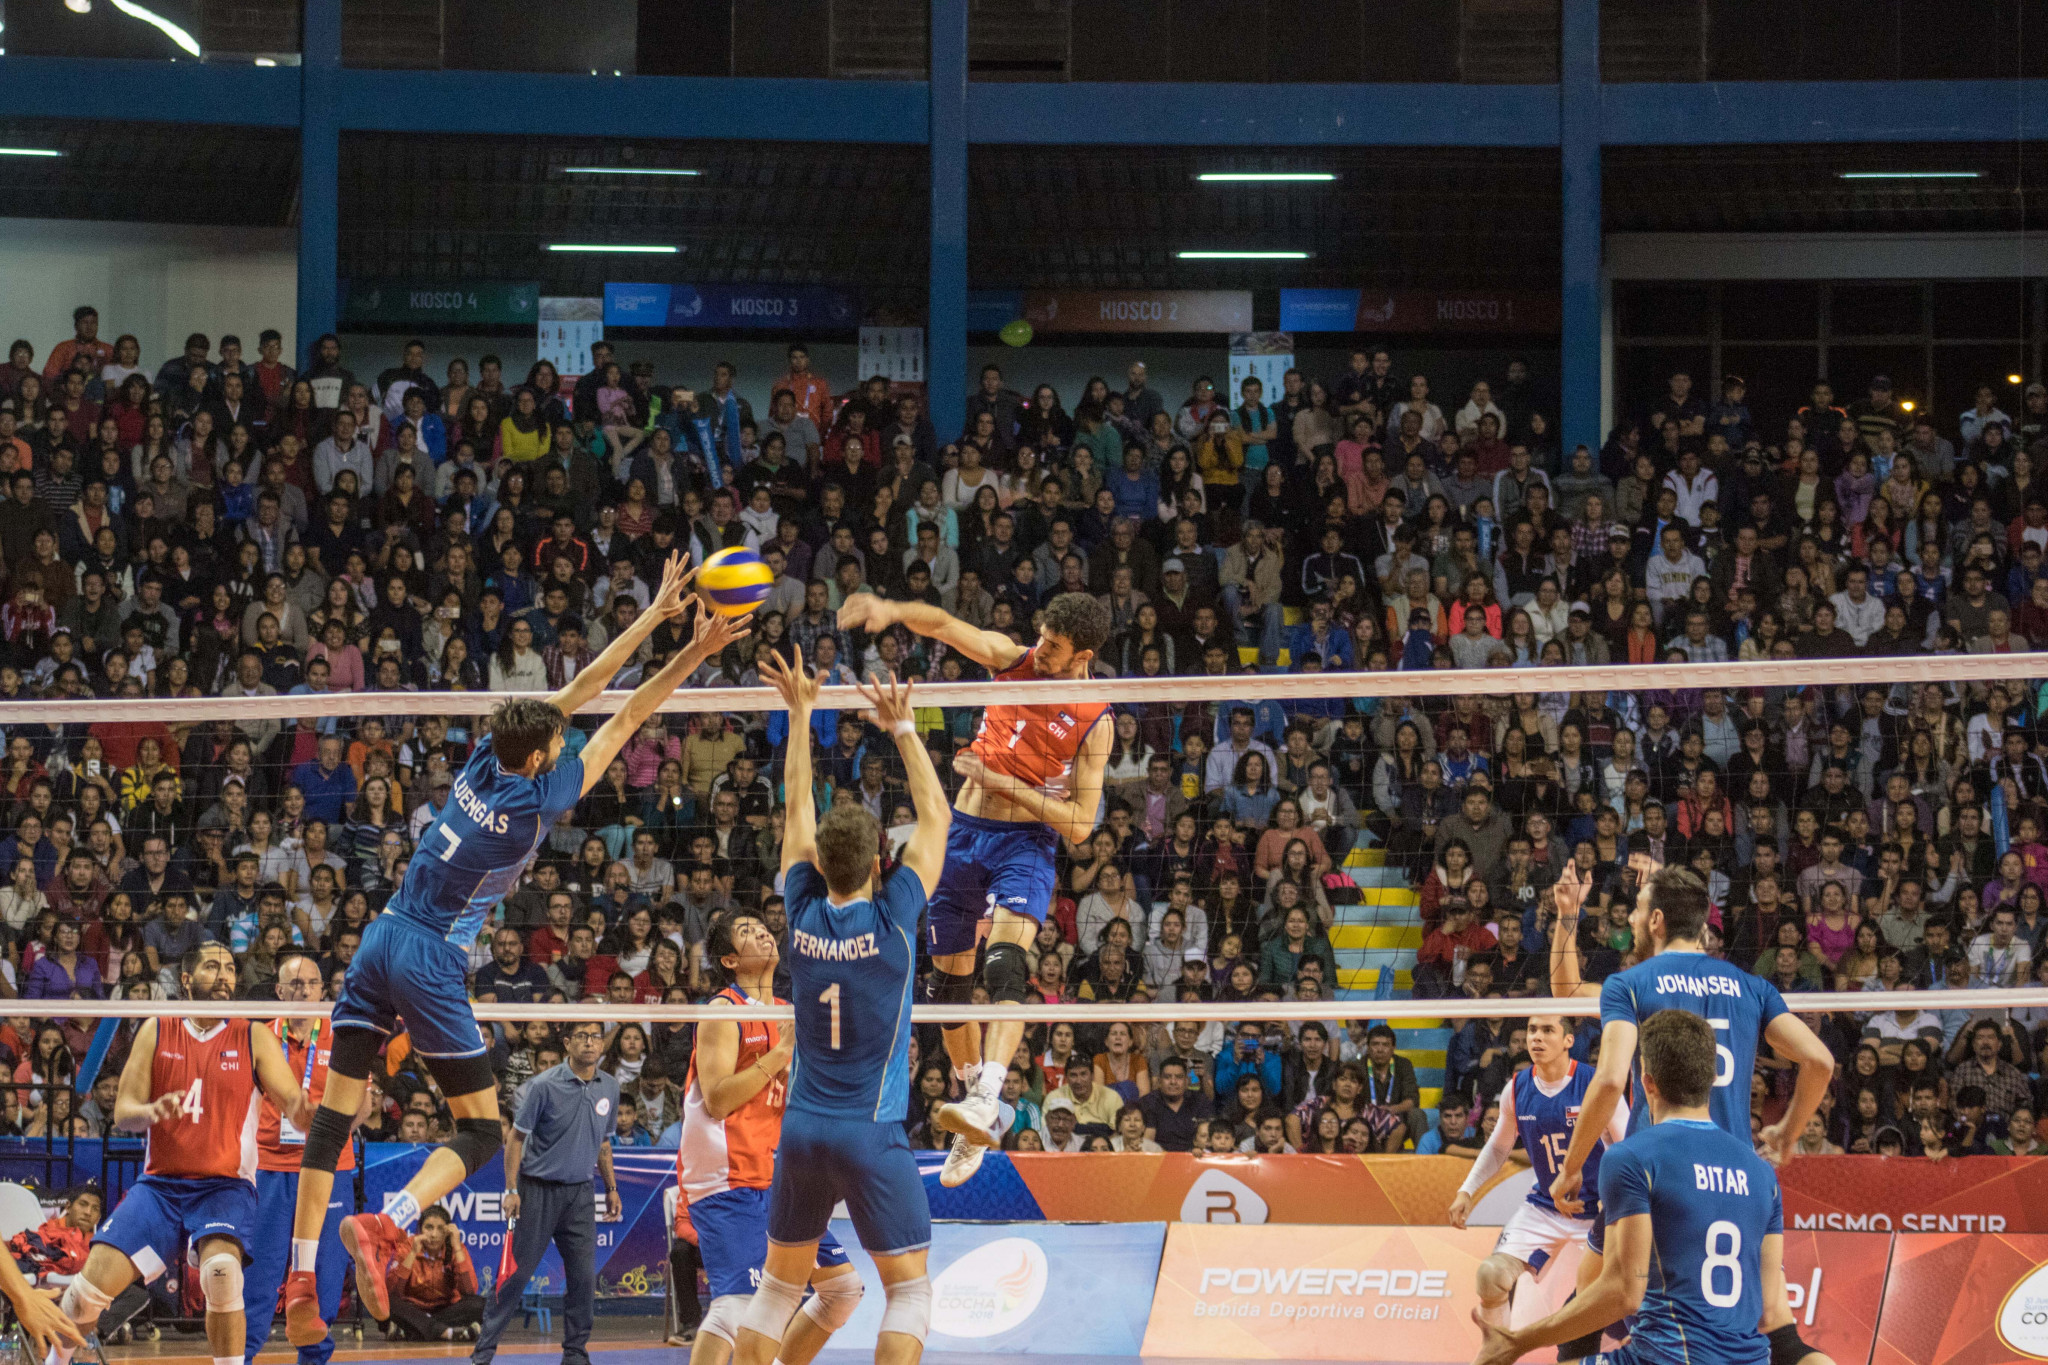 Argentina claimed the men’s volleyball title at the 2018 South American Games after beating Chile in today’s final in Cochabamba in Bolivia ©Cochabamba 2018